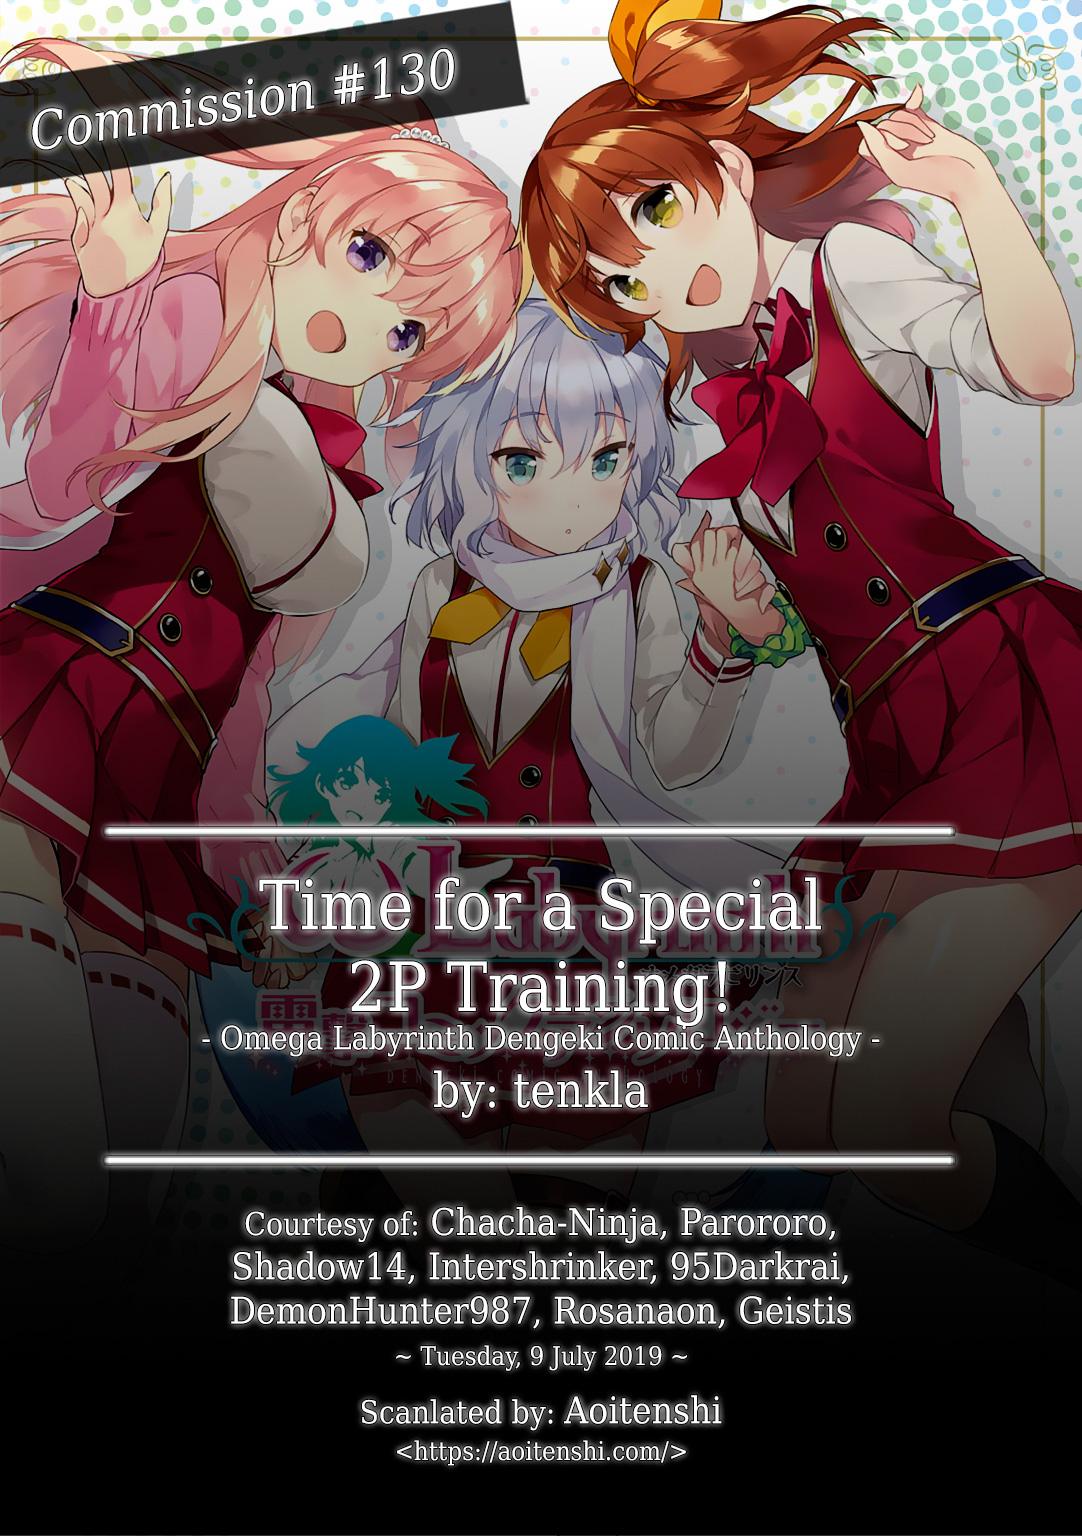 Omega Labyrinth Dengeki Comic Anthology Ch. 1 Time for a Special 2P Training! (tenkla)